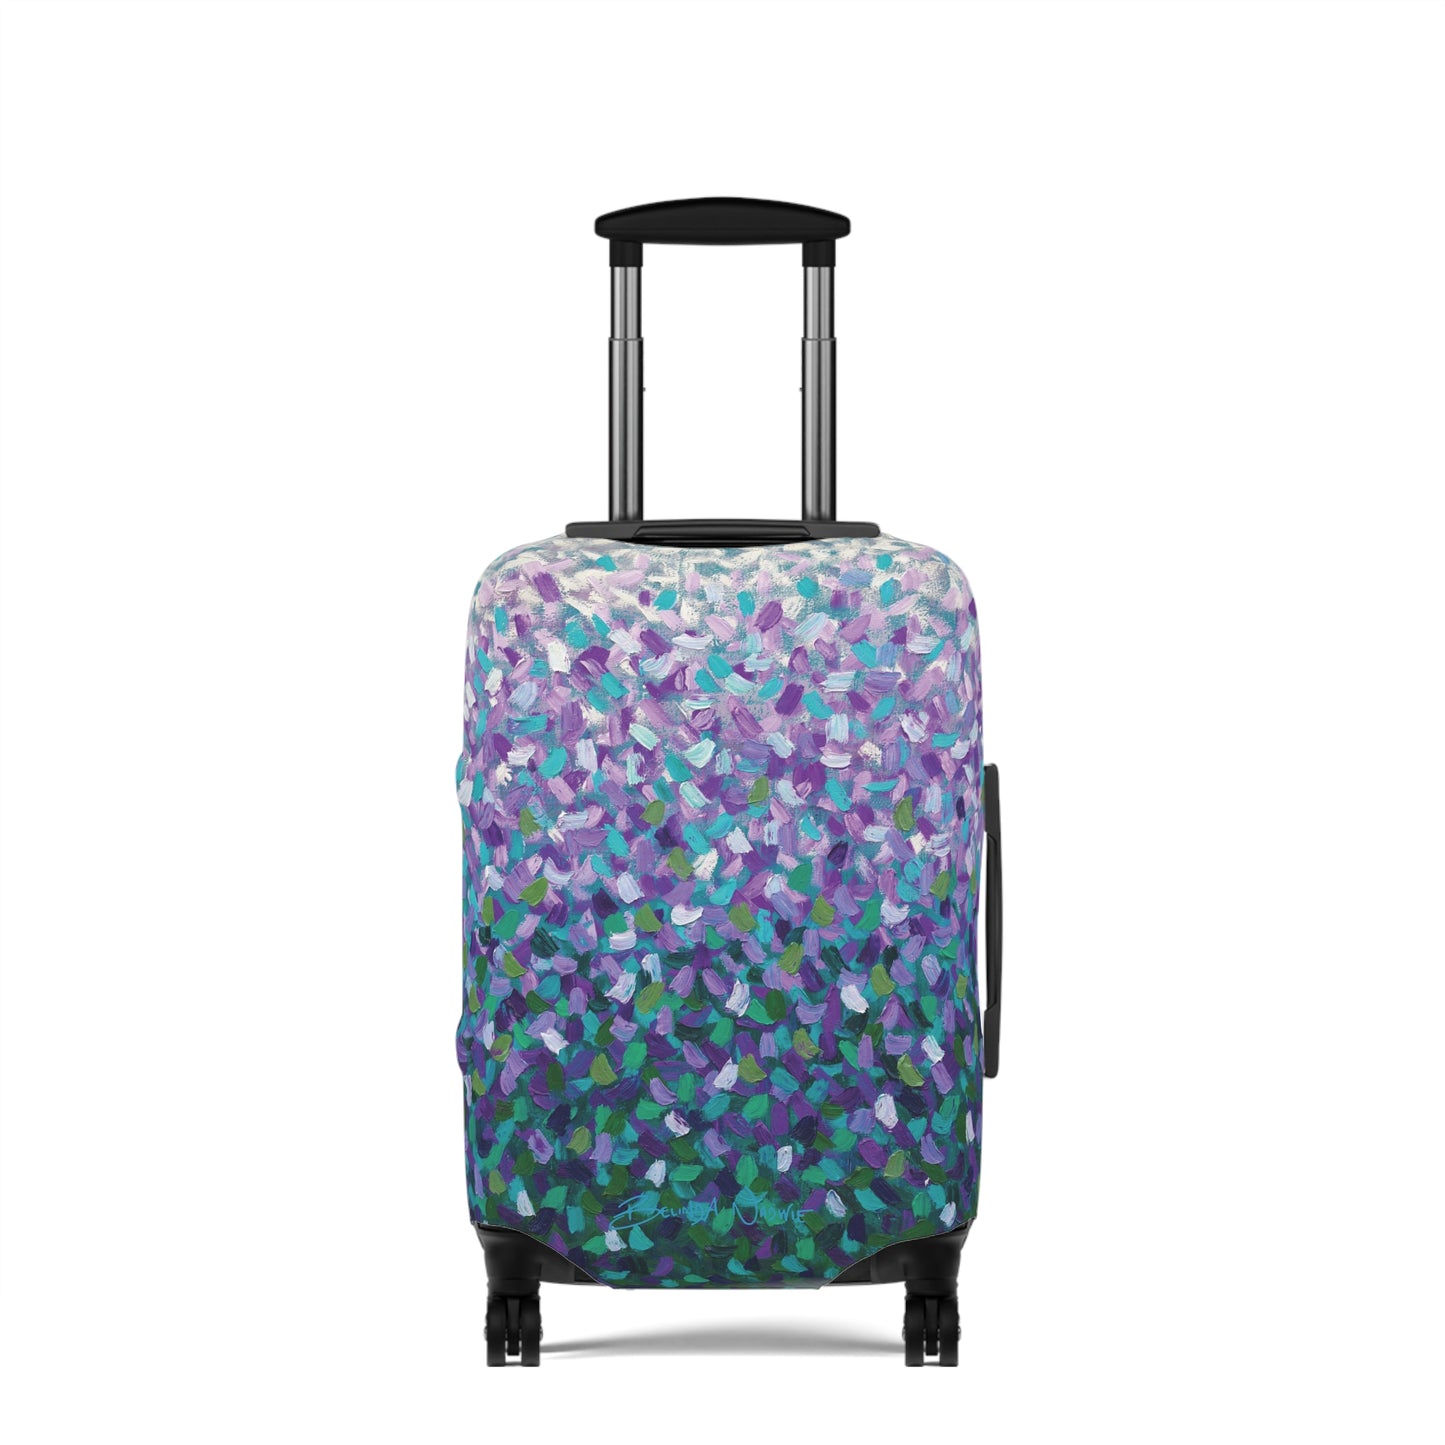 Hunter Valley Dreaming Luggage Cover